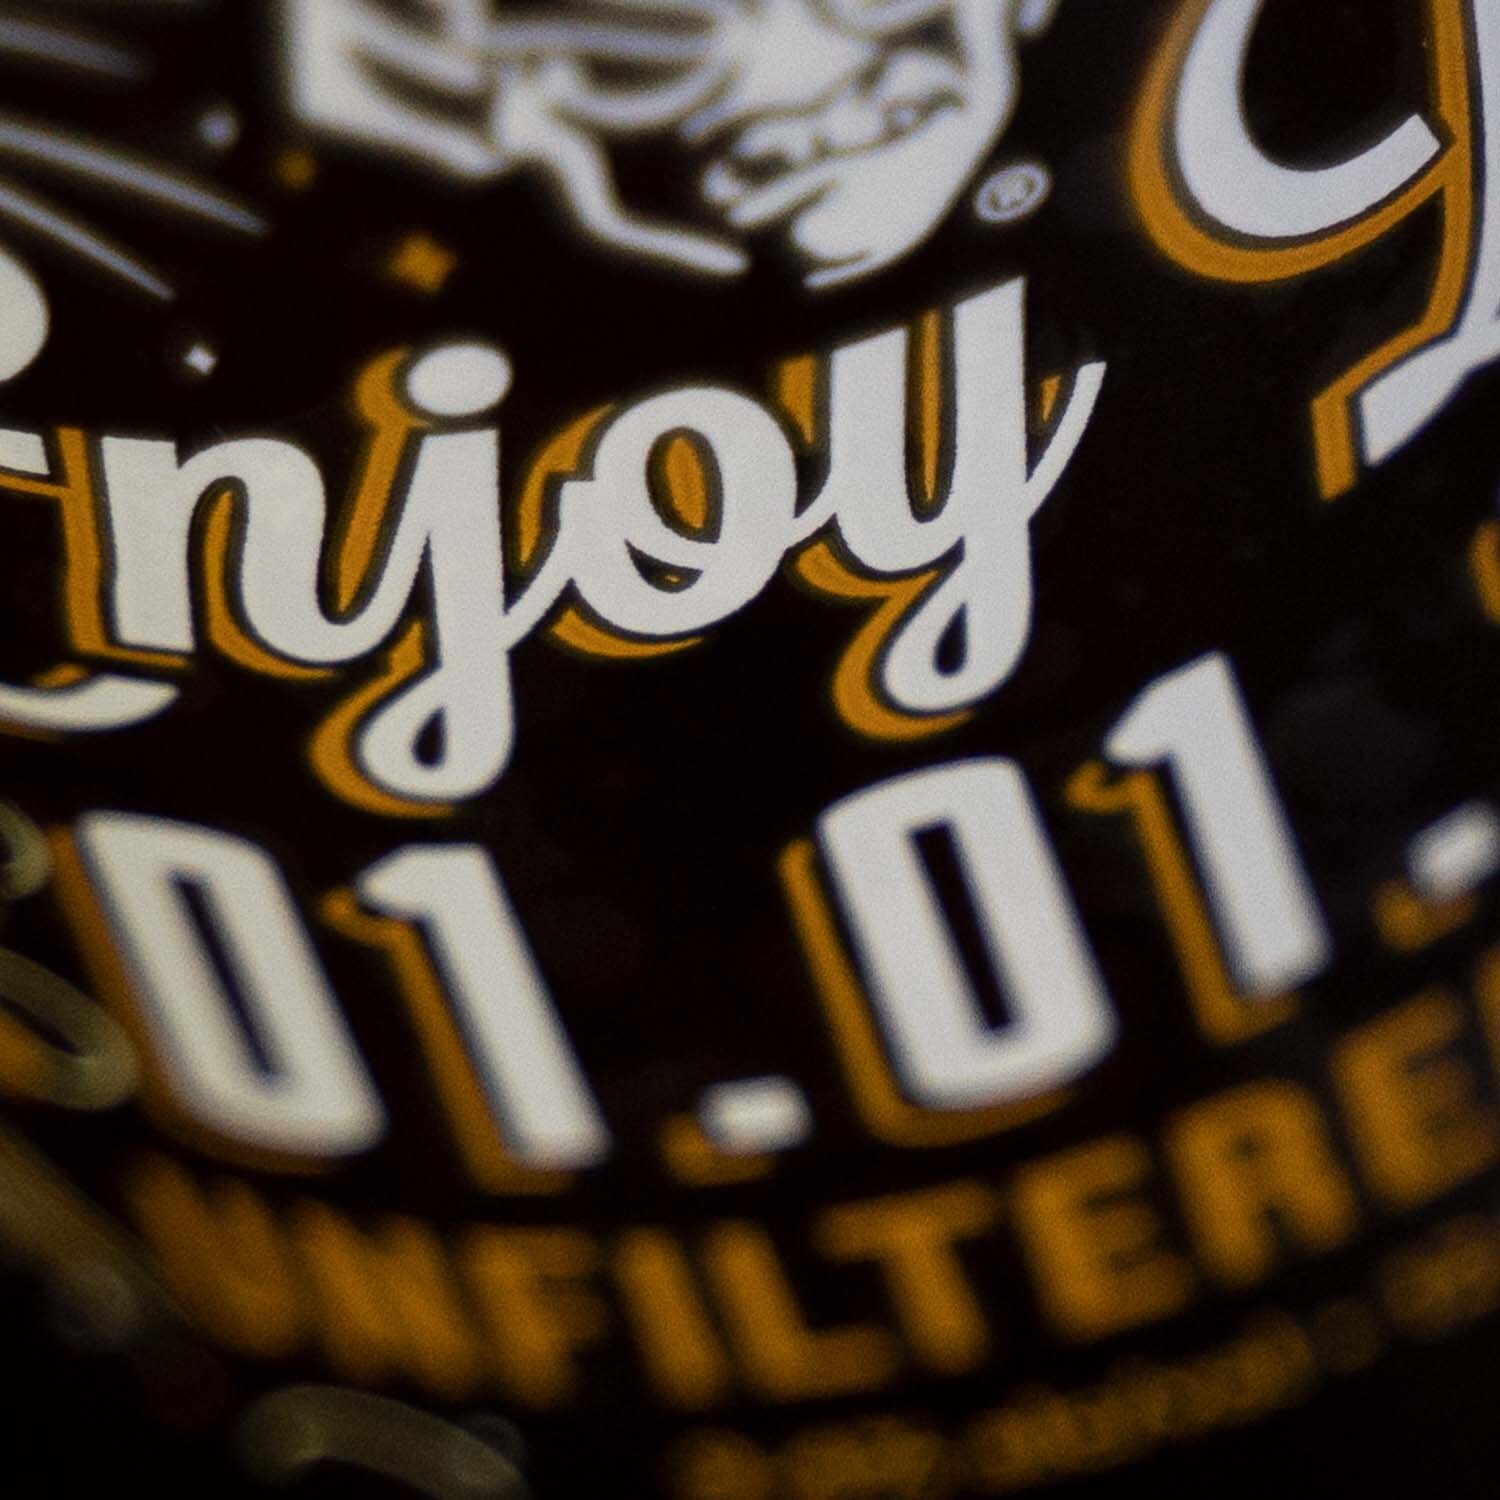 Stone Enjoy By 01.01.22 Unfiltered IPA close-up